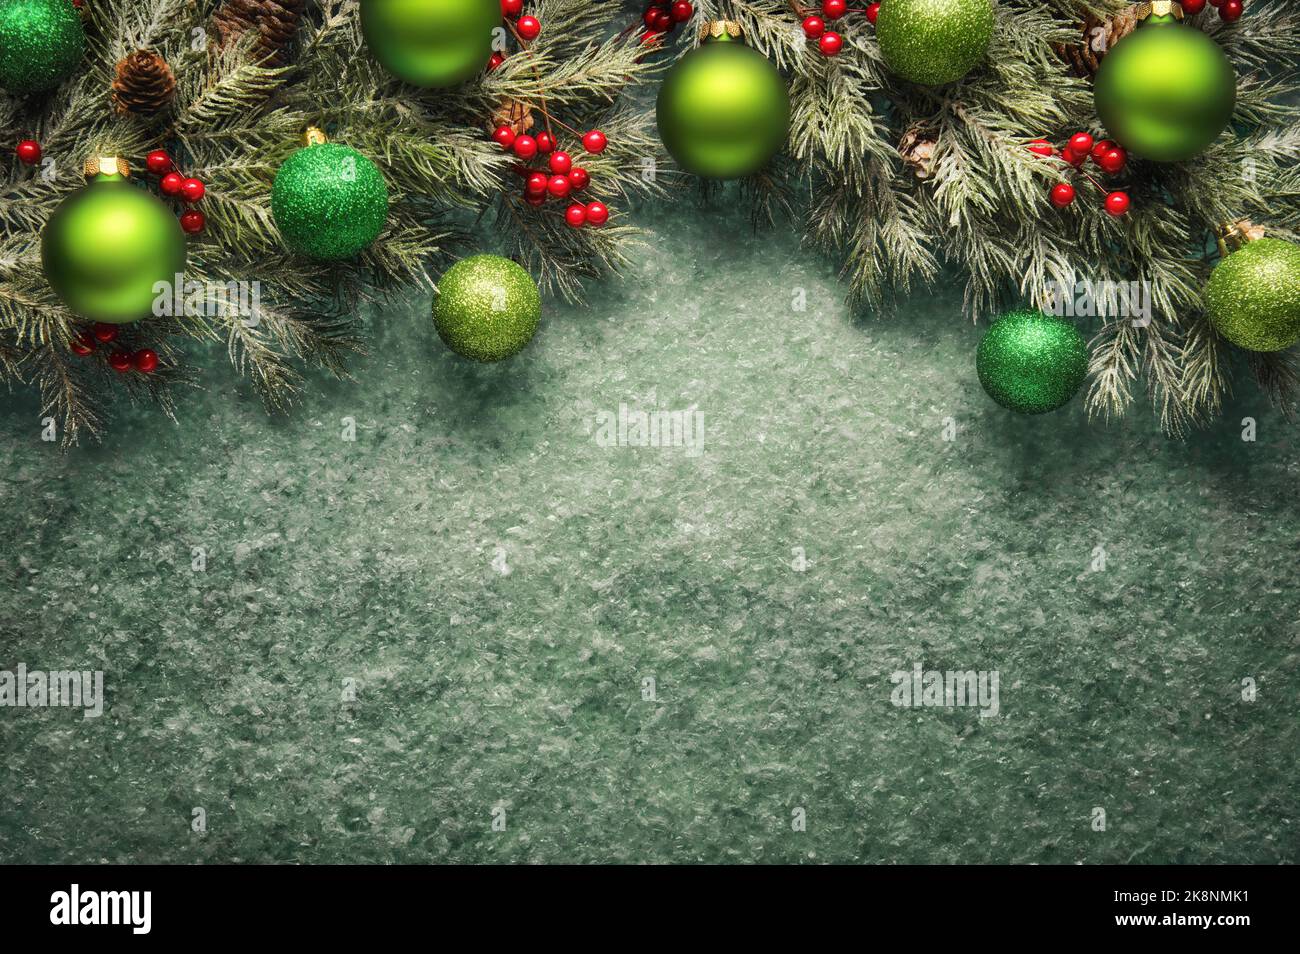 Christmas background in green, with textured copy-space and an arch-shaped border composed of fir branches, baubles and holly Stock Photo